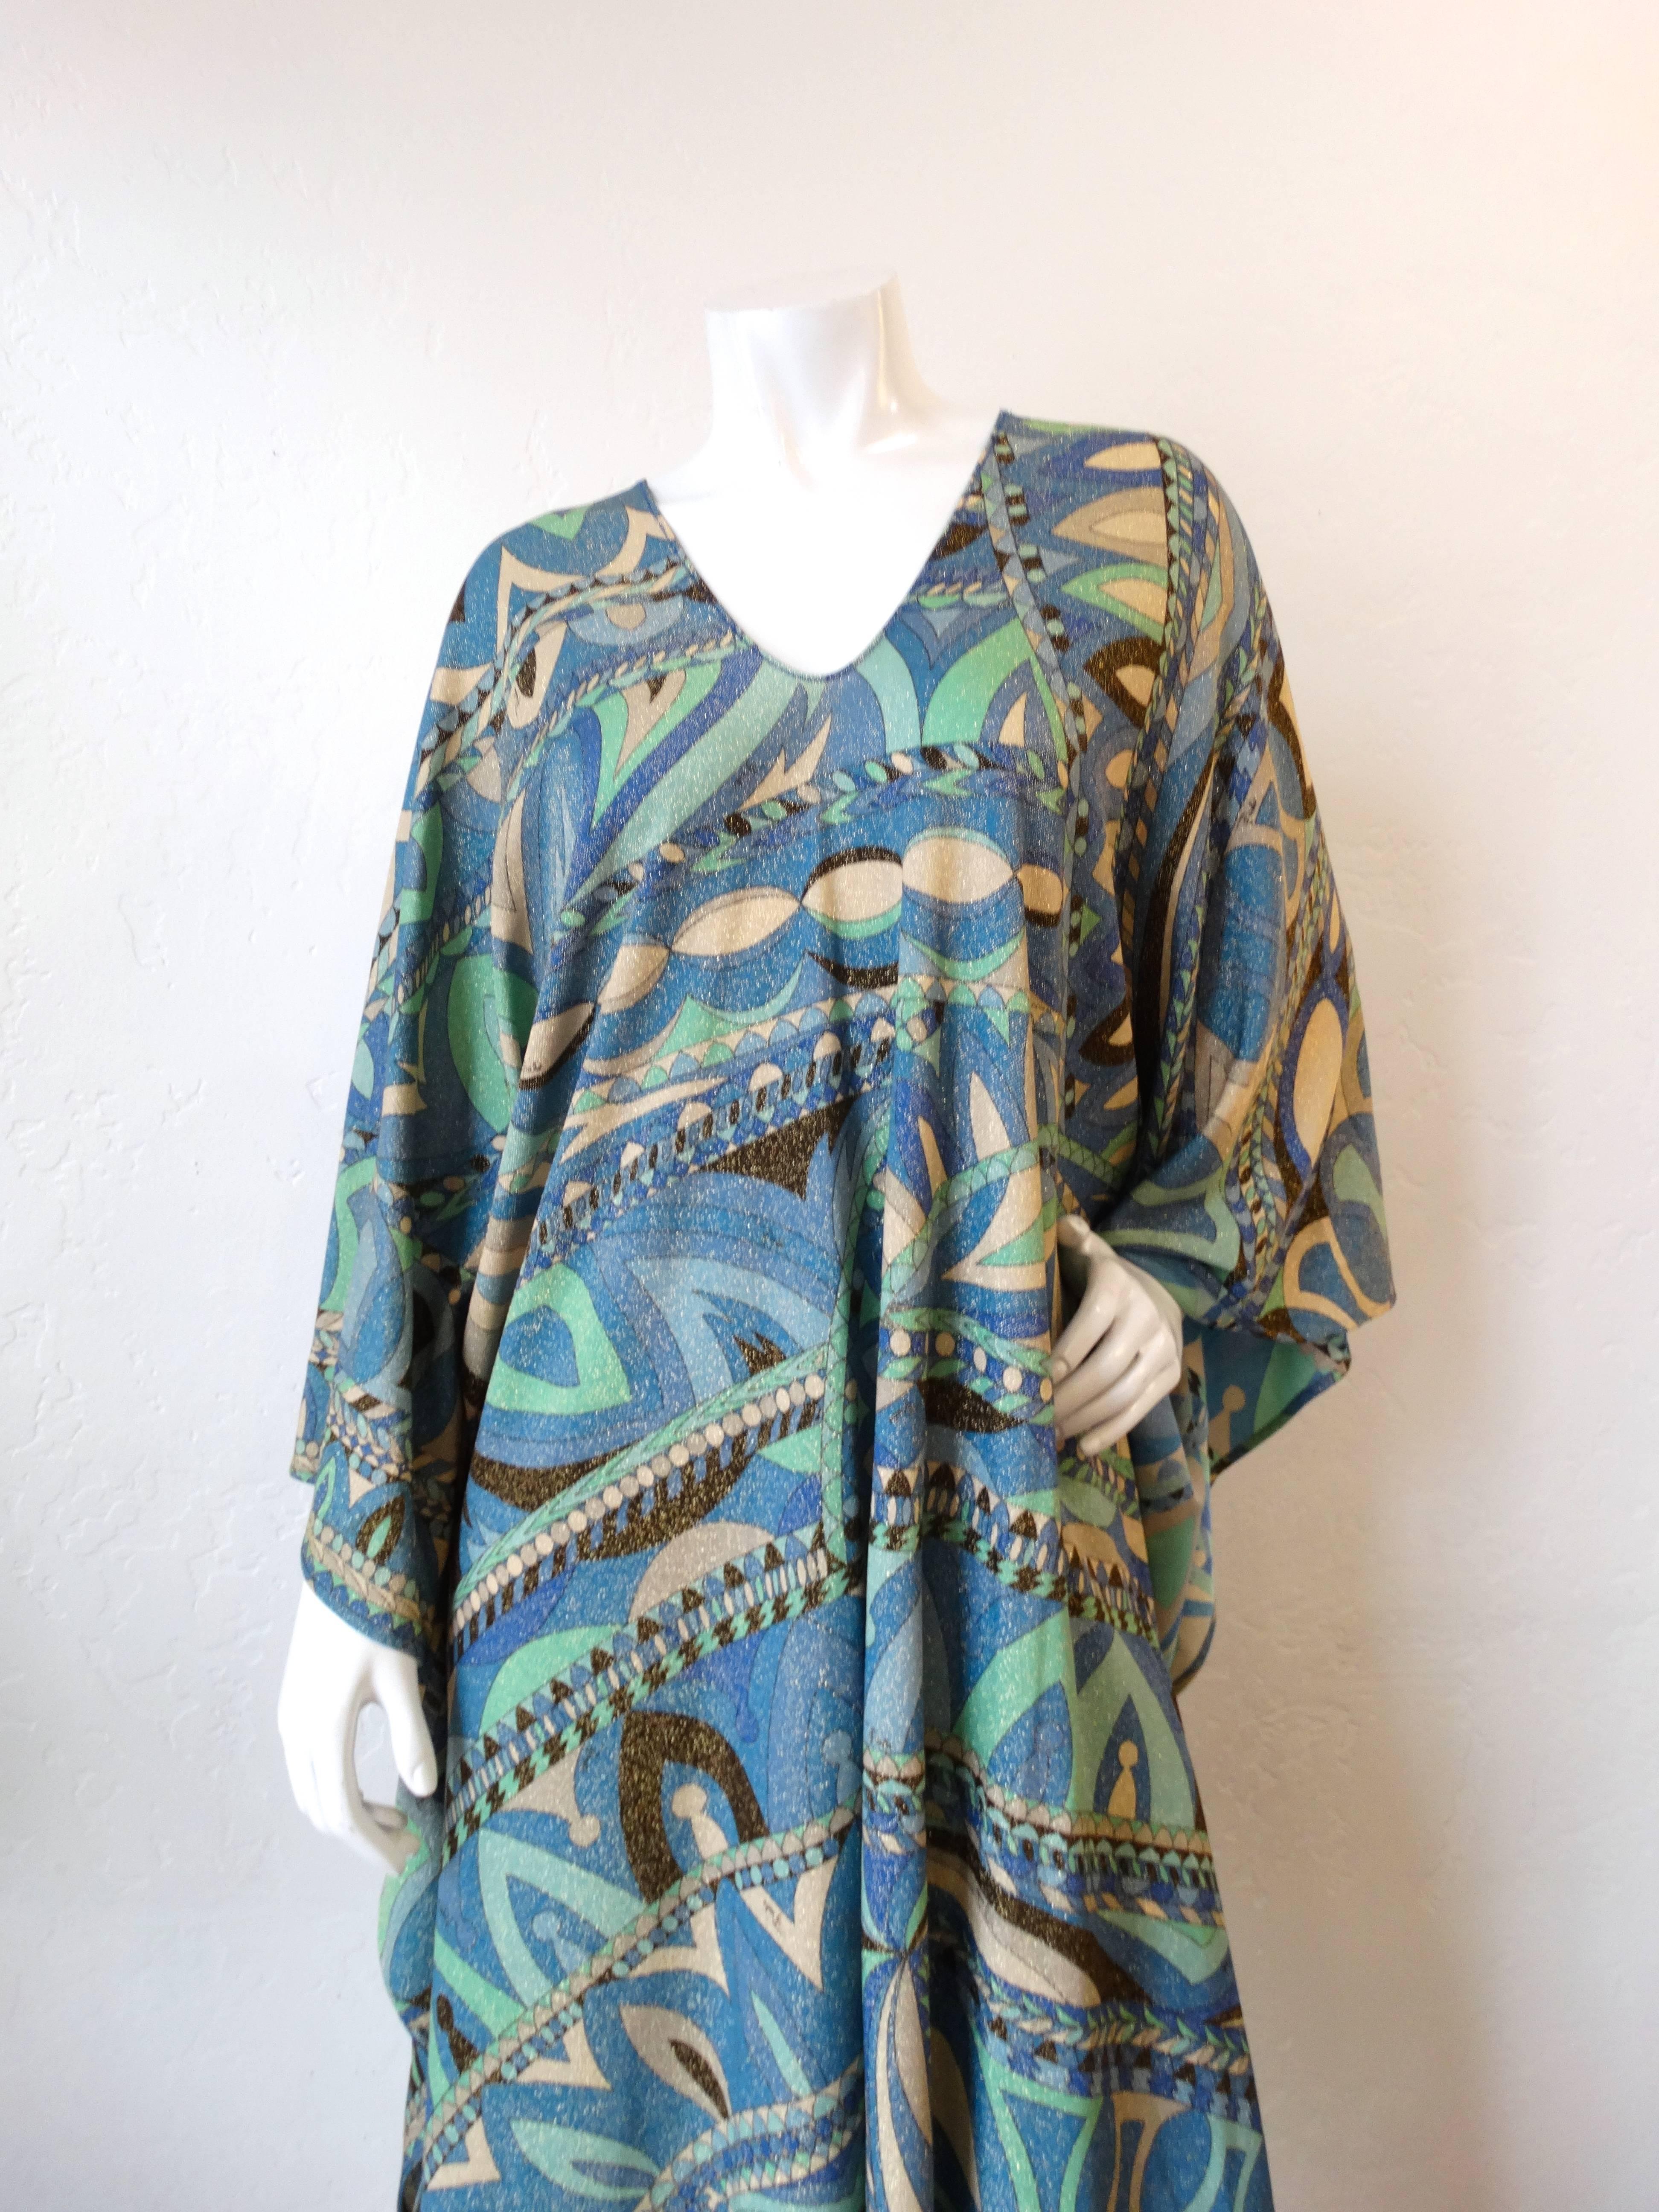 It doesn't get any more Pucci than this amazing 1970s Emilio Pucci geometric printed kaftan! Made of a glitzy, glittery lurex fabric with incredible blue geometric pattern. Kaftan style fit, v neckline, maxi length with angel wing sleeves. Rock this